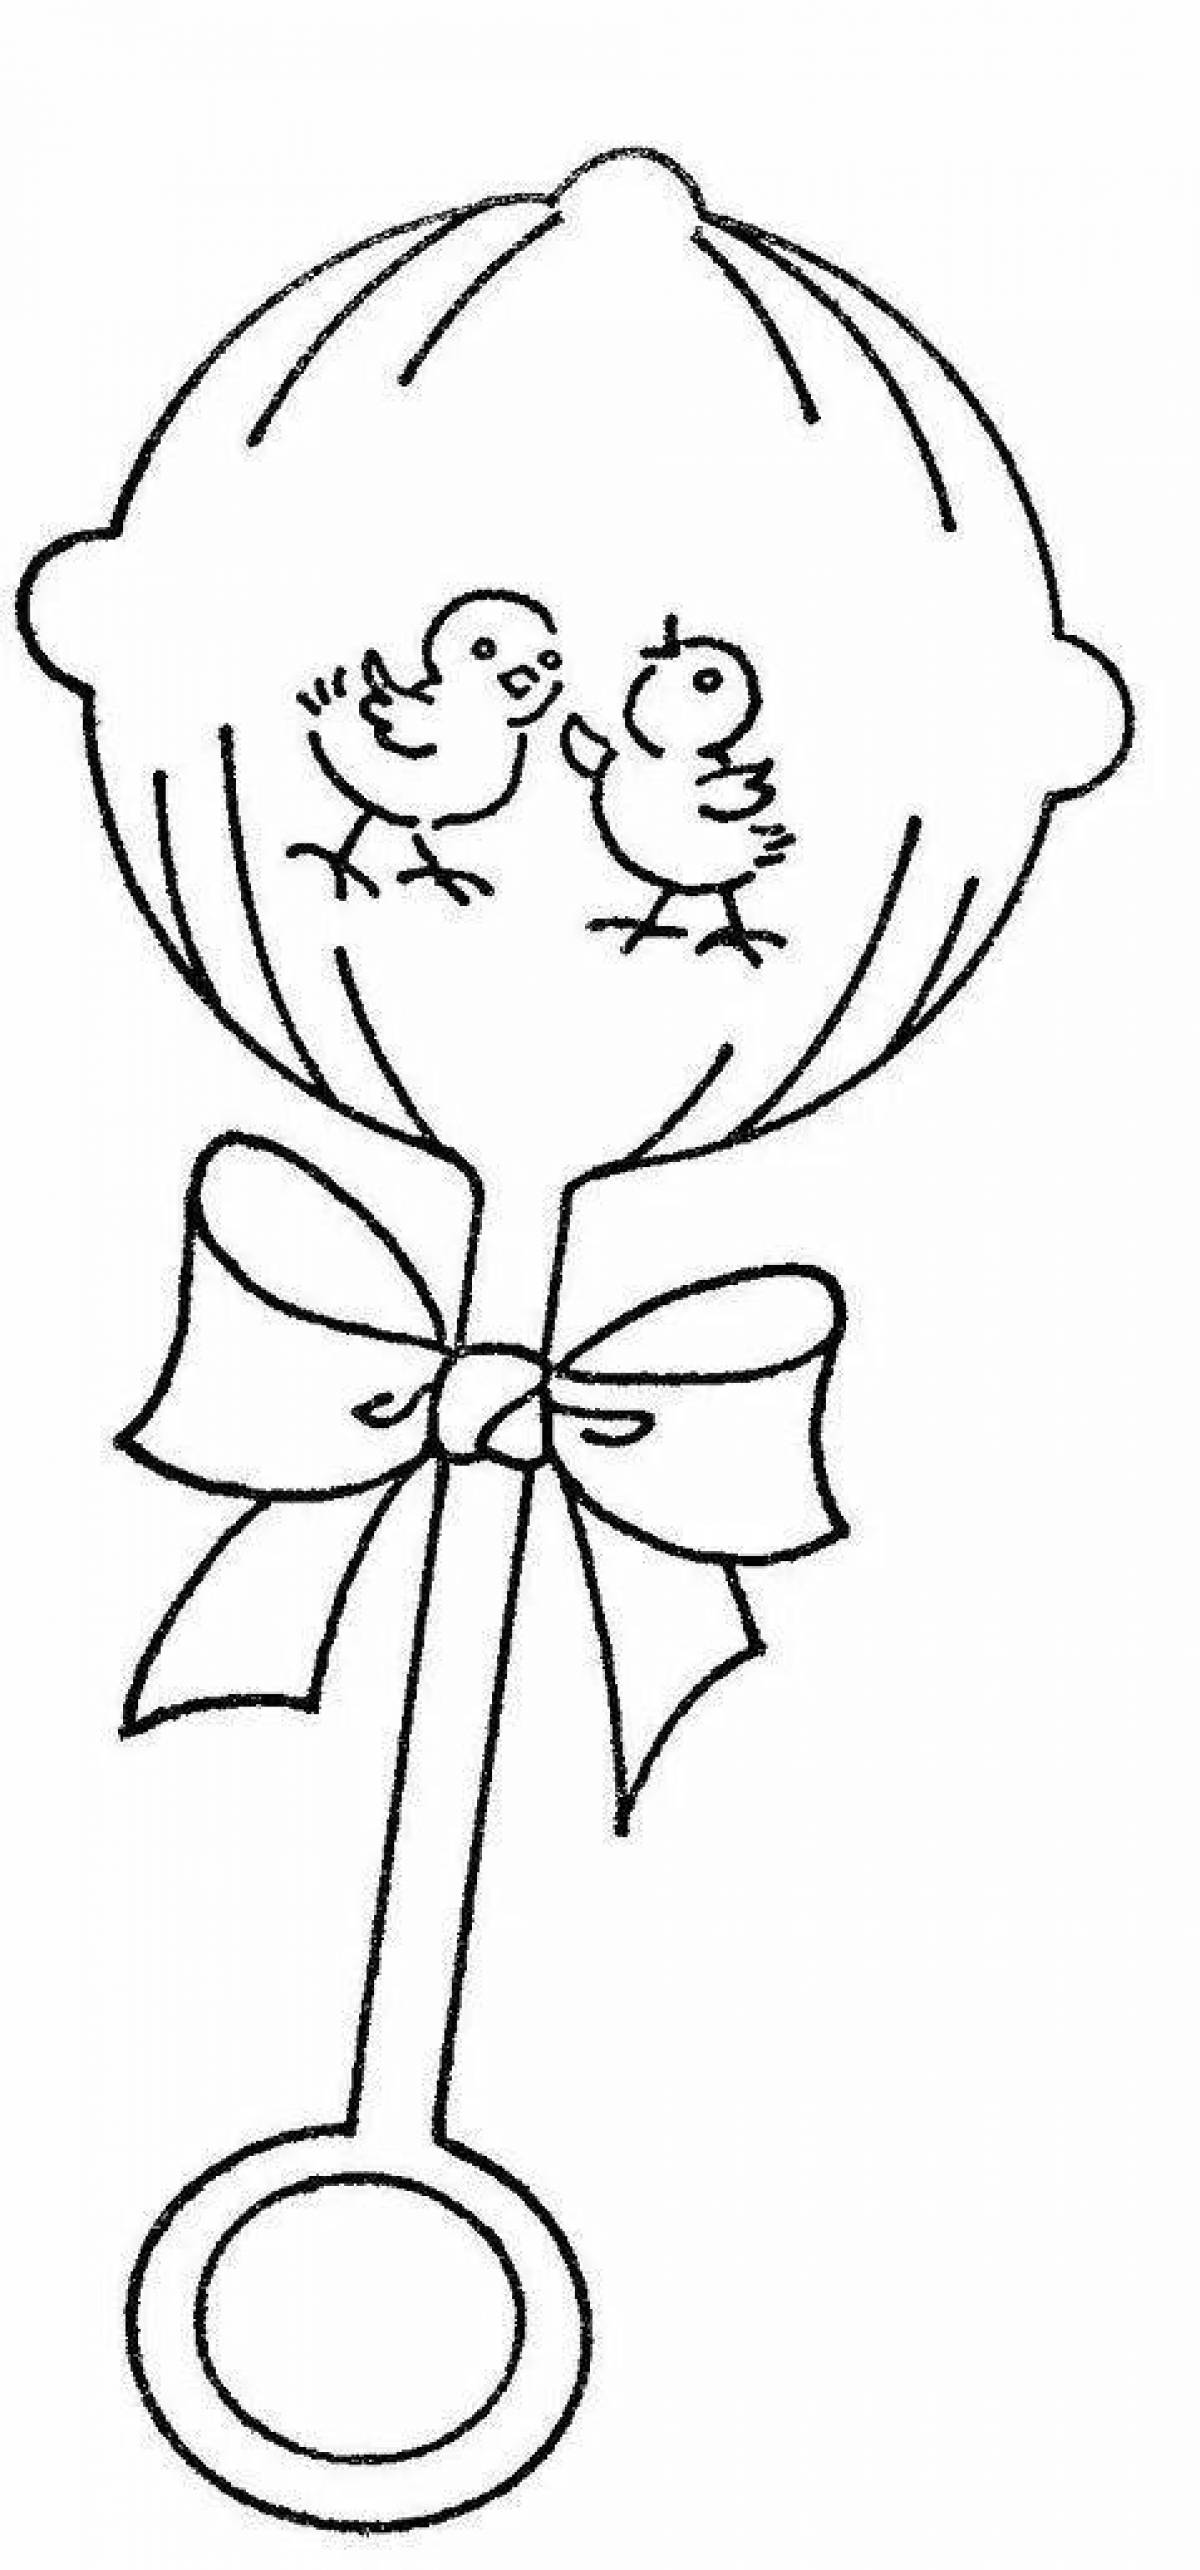 Cute rattle coloring page